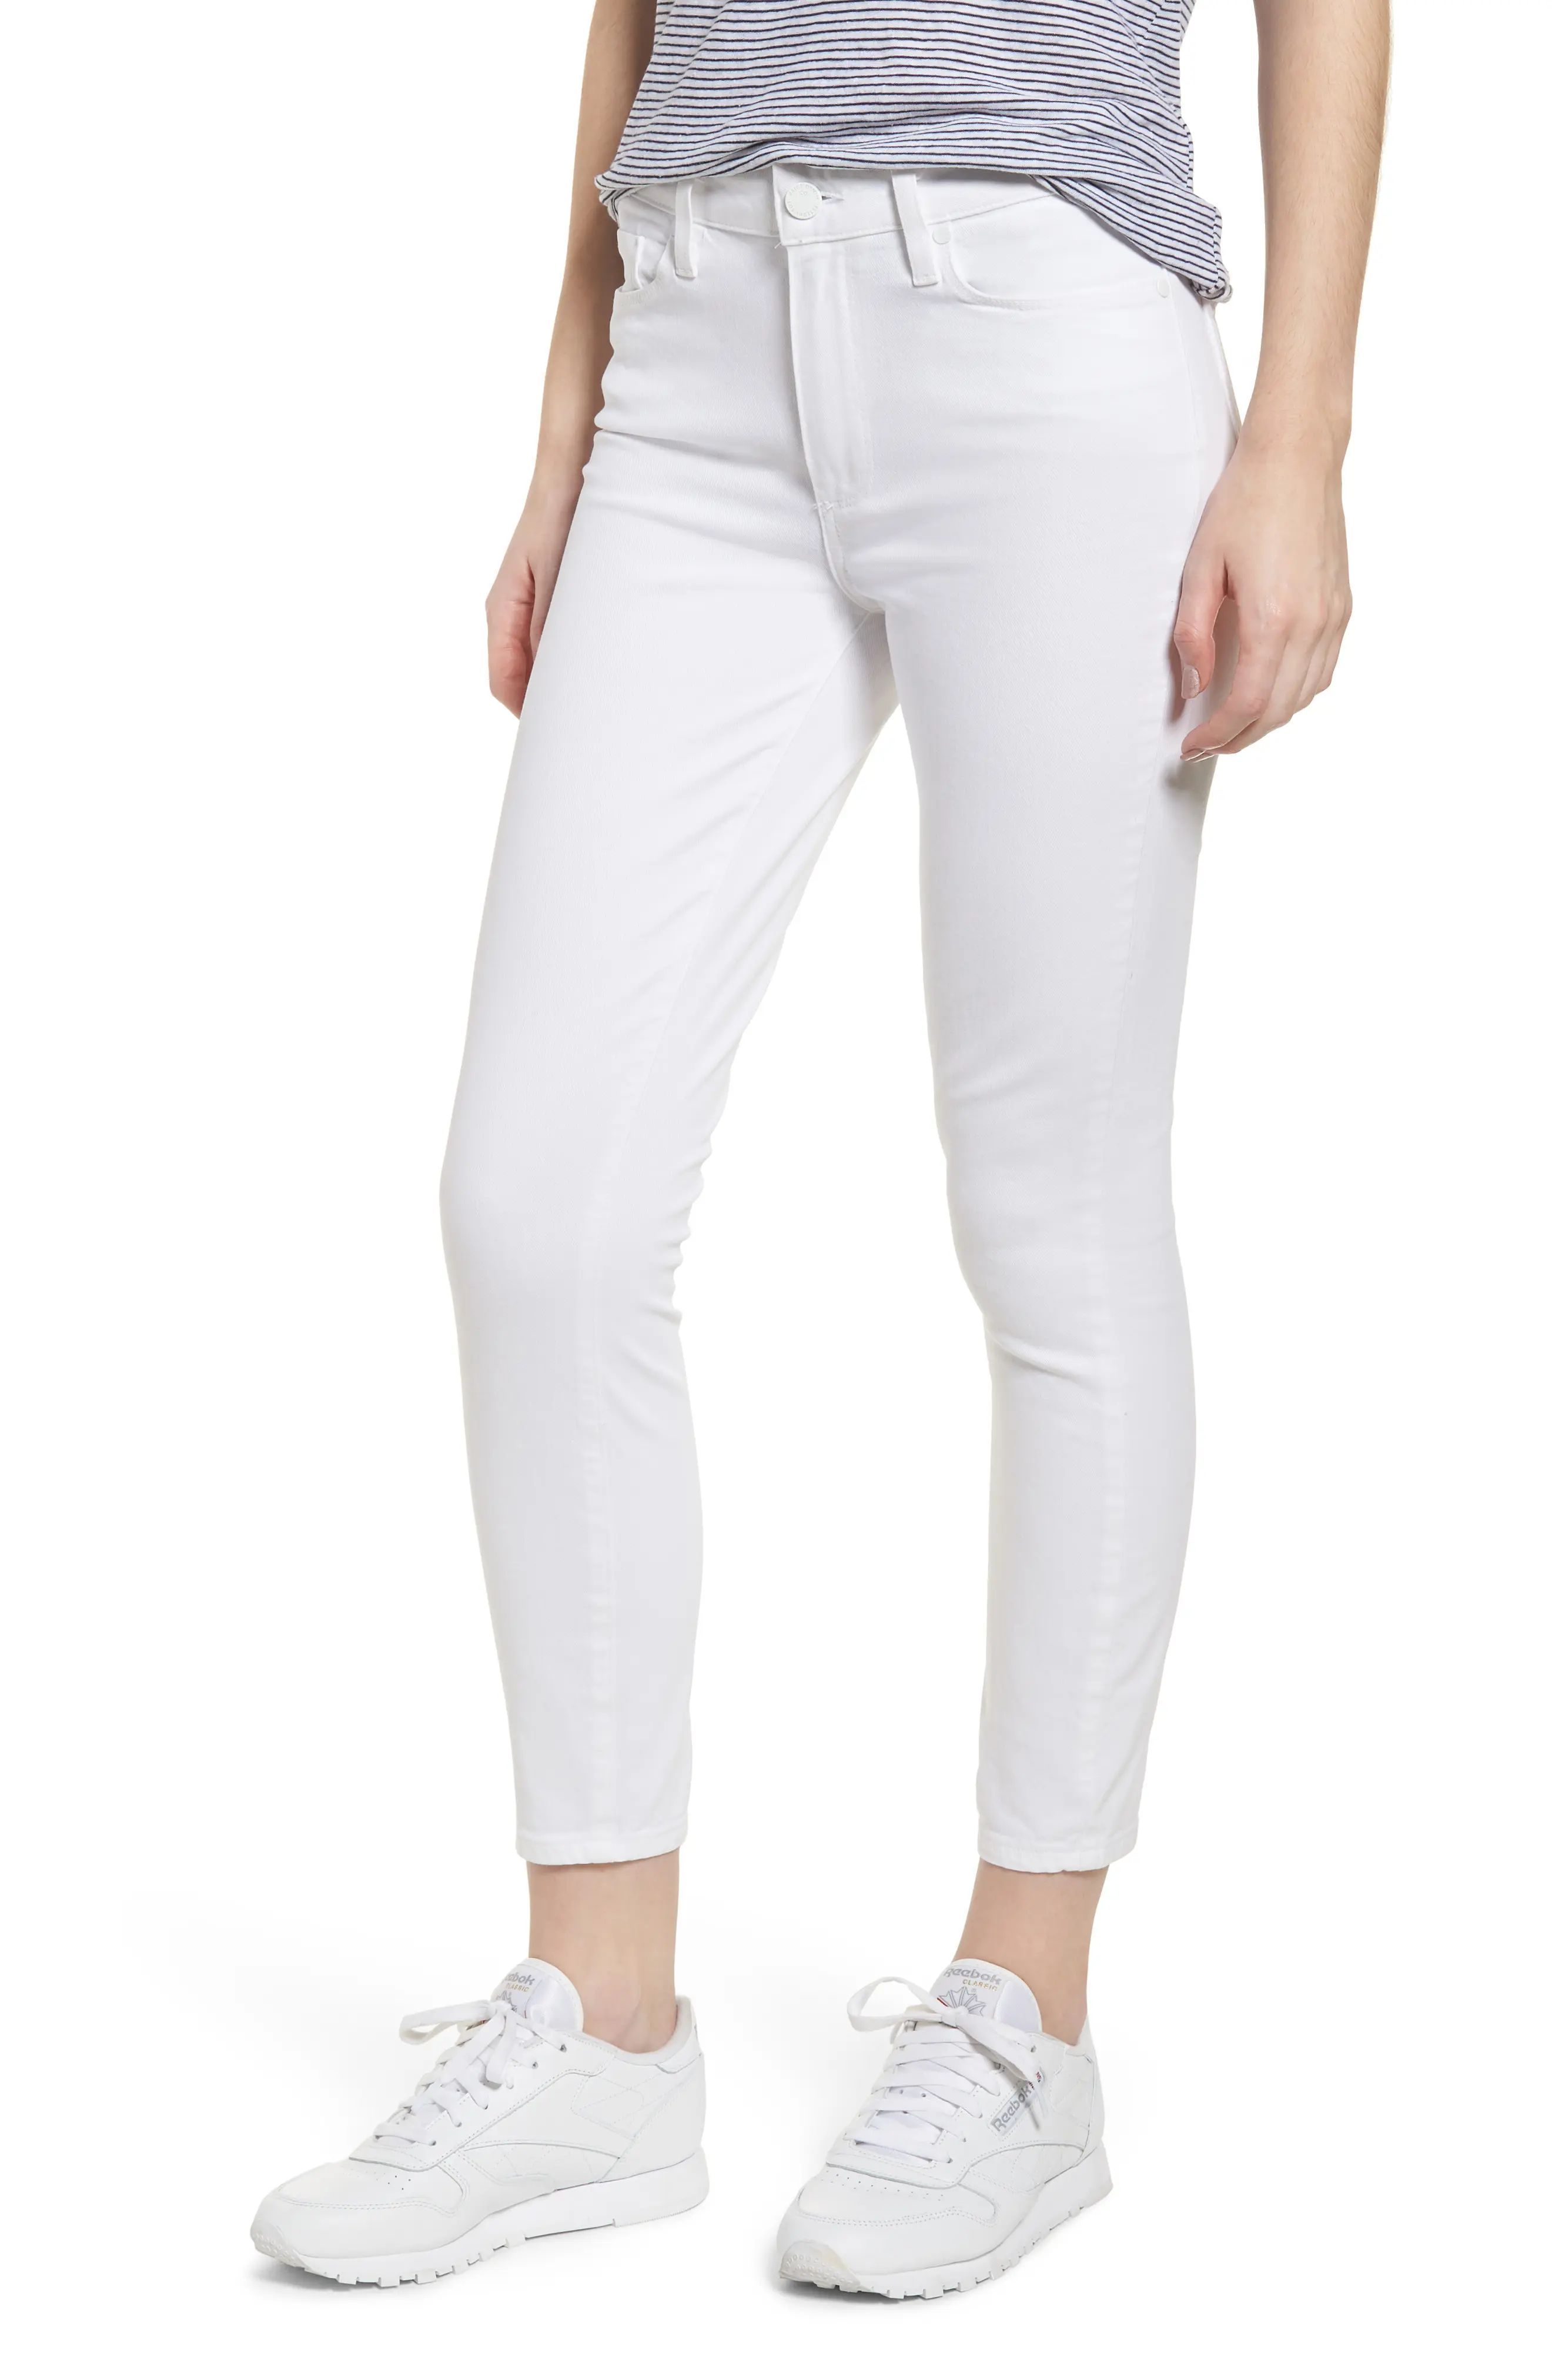 Women's Paige Hoxton High Waist Crop Skinny Jeans, Size 24 - White | Nordstrom